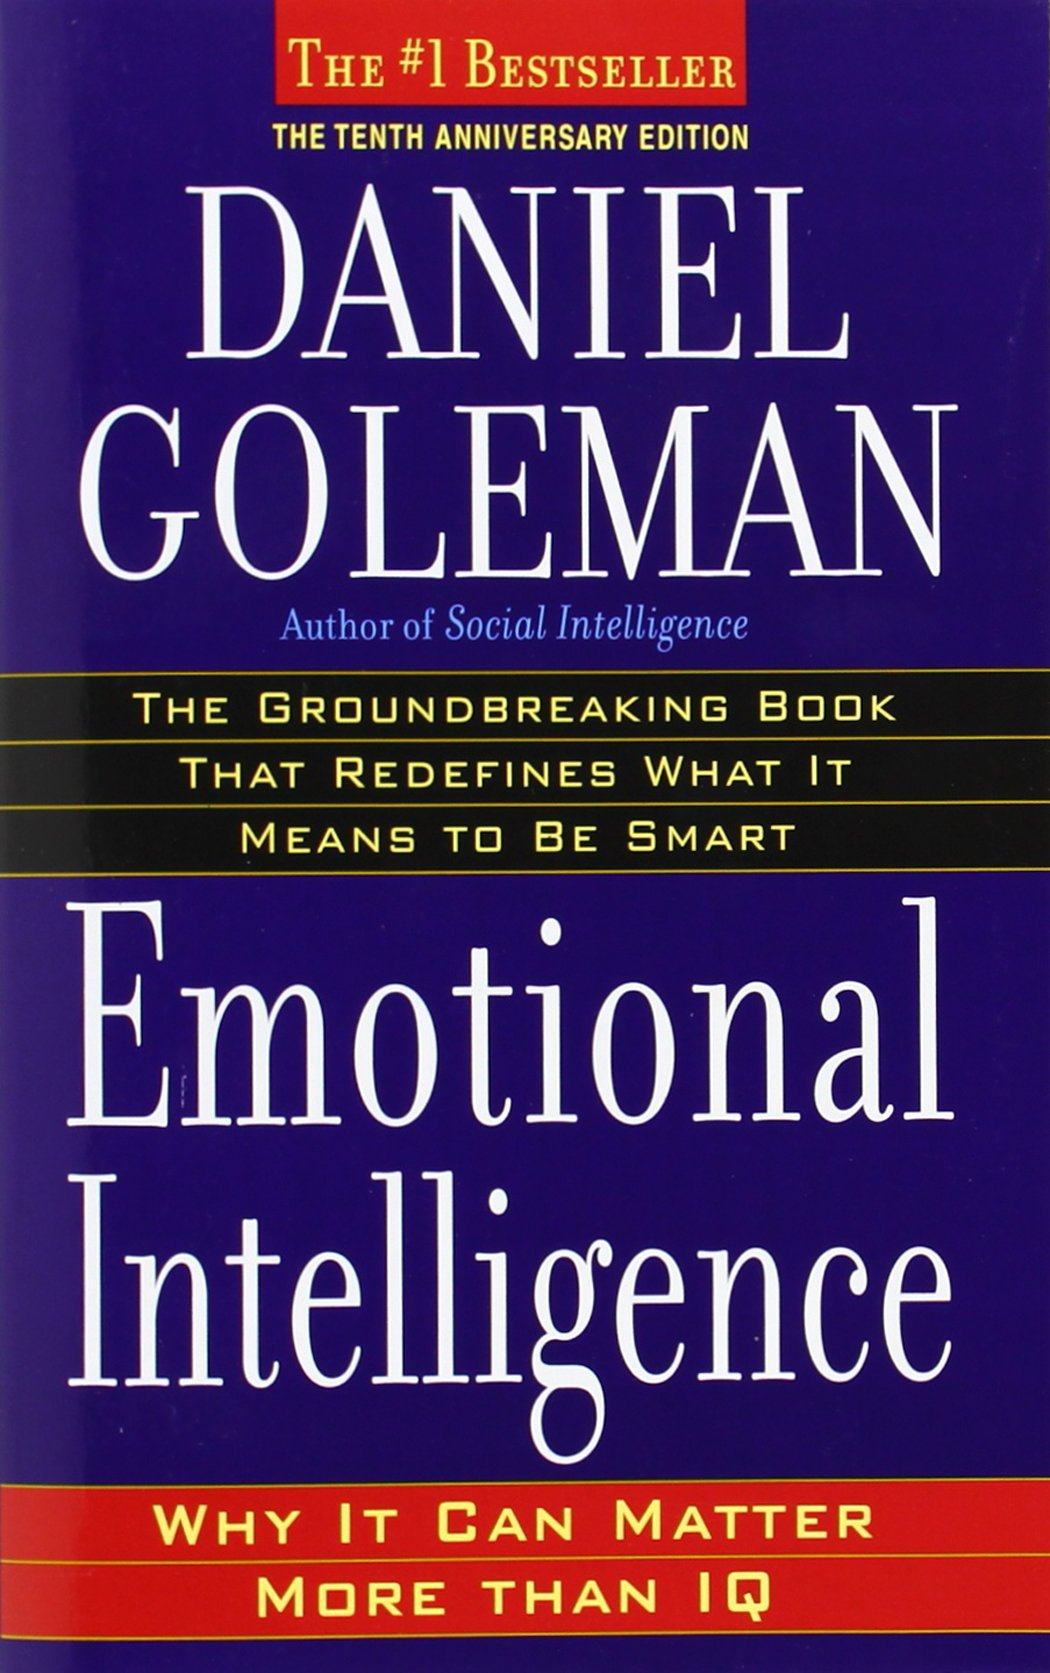 3.	Emotional Intelligence: Why It Can Matter More Than IQ